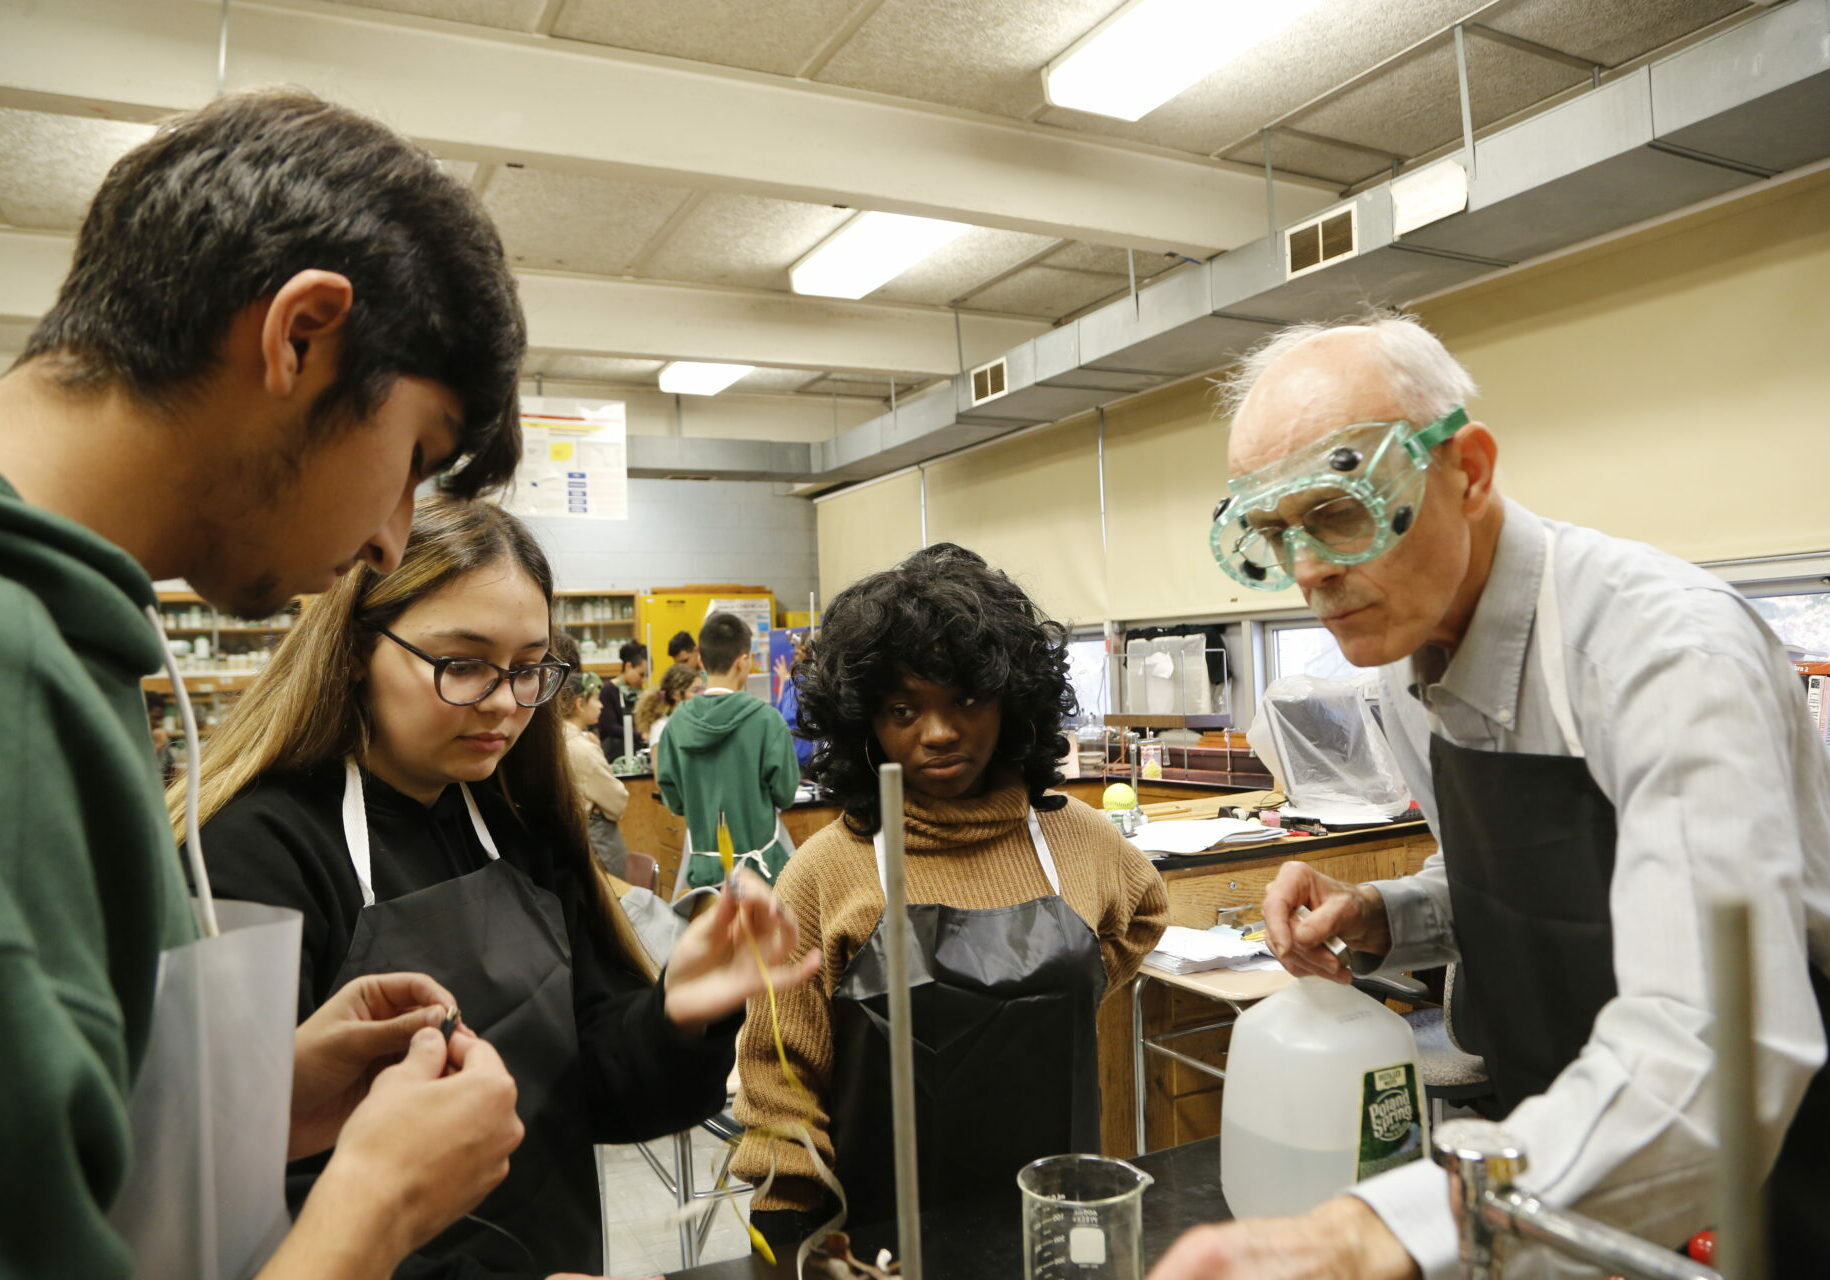 Roselle Park chemistry and physics teacher Raymond Bangs builds strong relationships with his students, getting to know them and their interests.